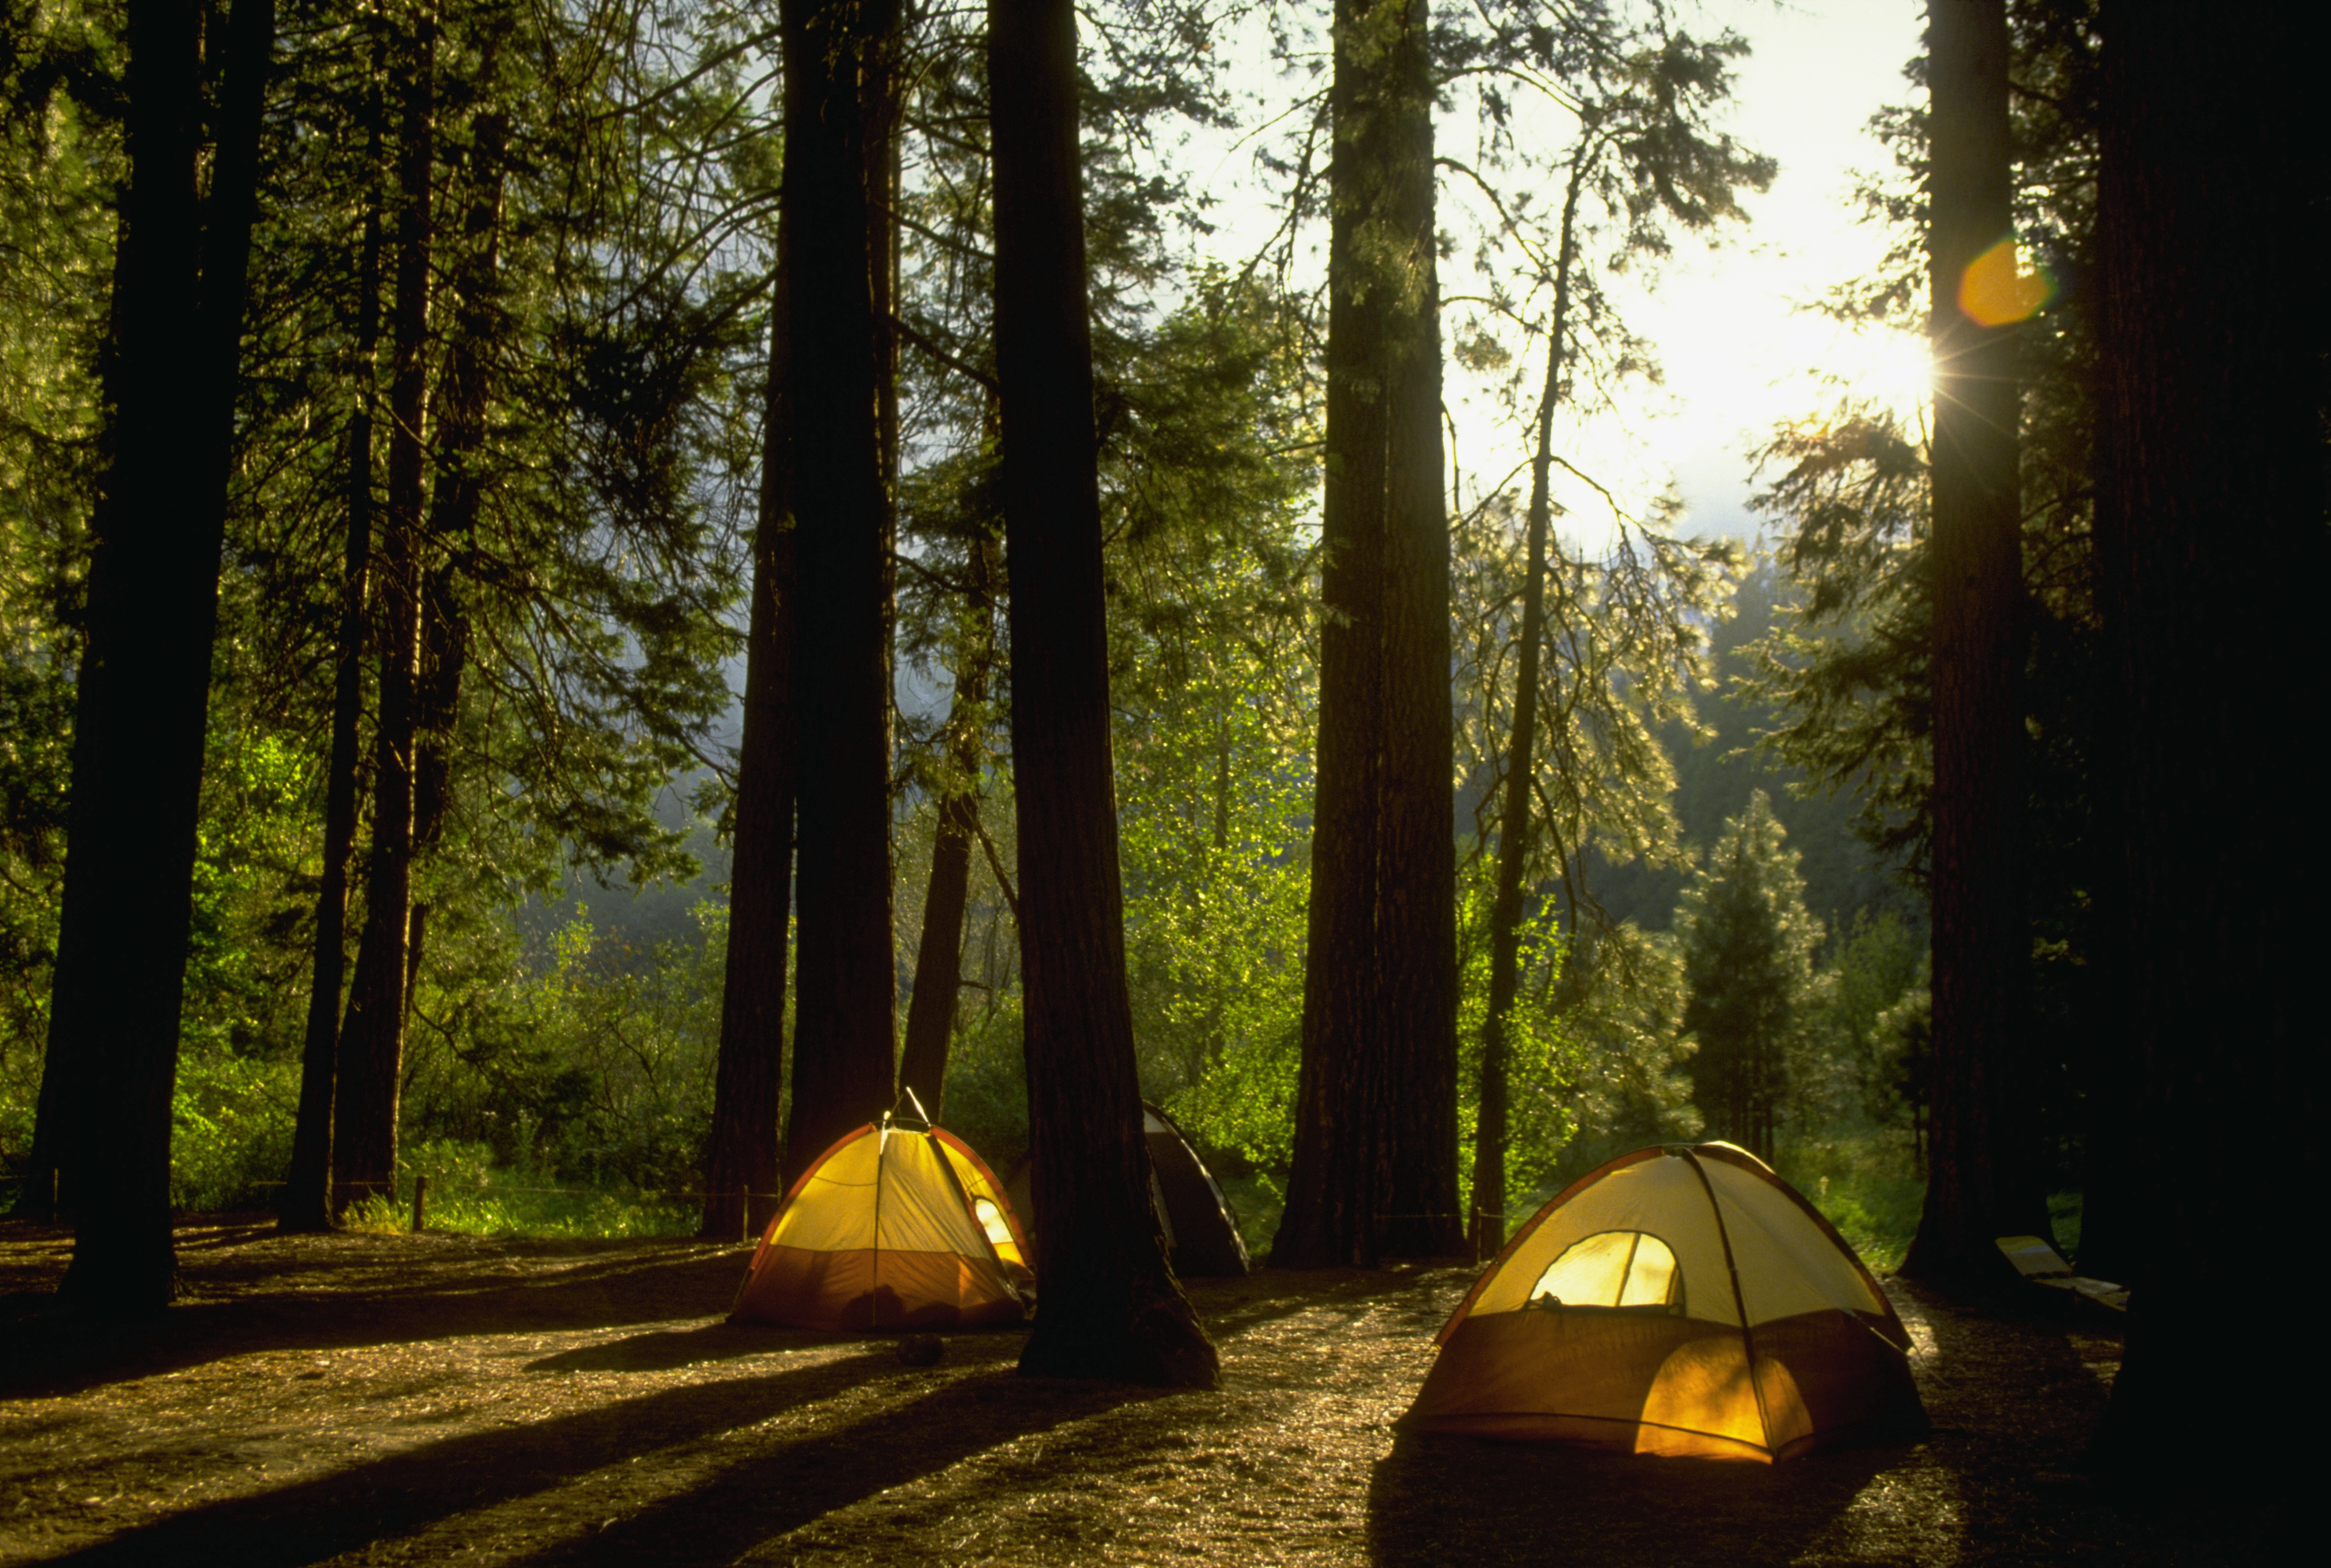 Two tents set up among tall trees with sunlight filtering through